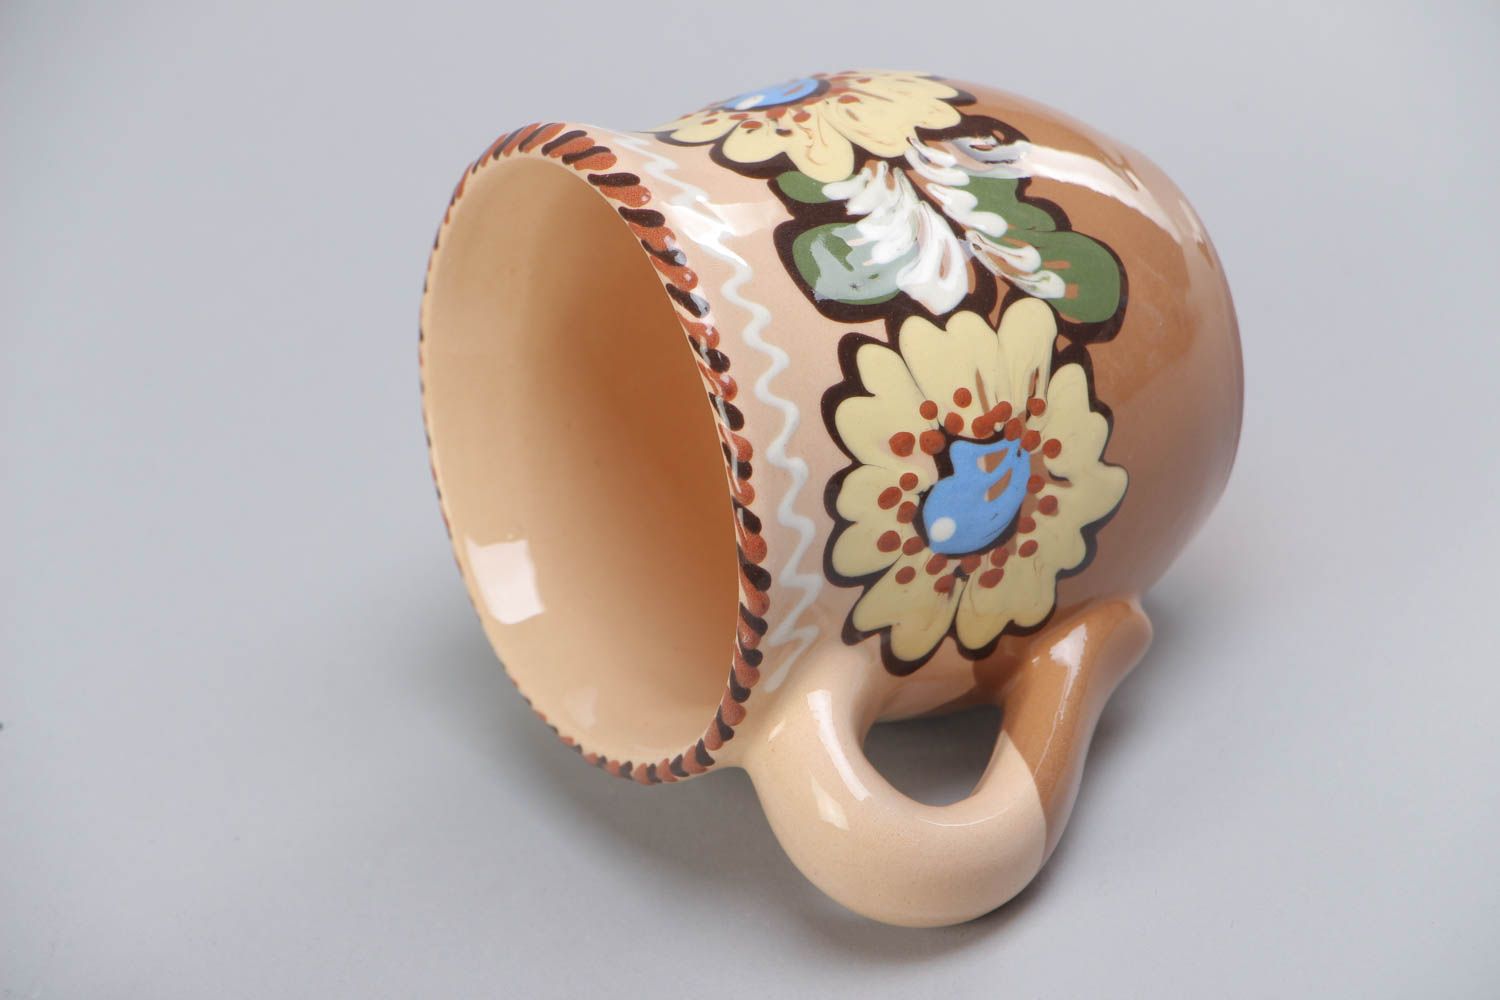 10 oz clay glazed cup with handle and floral design in brown, beige, and blue color photo 4